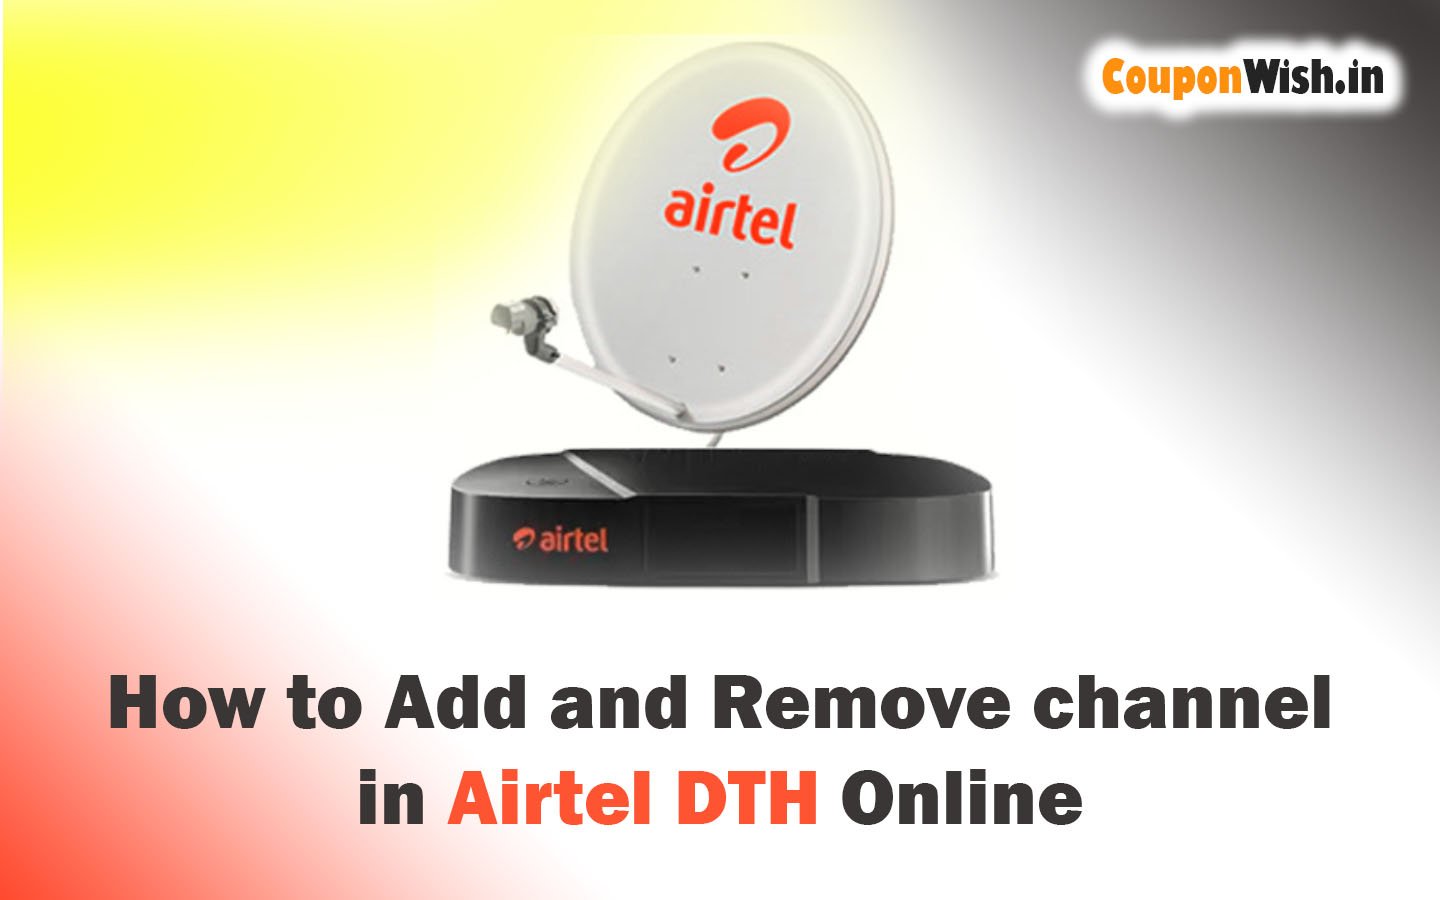 How To Add Channel In Airtel DTH Online - Remove Channels